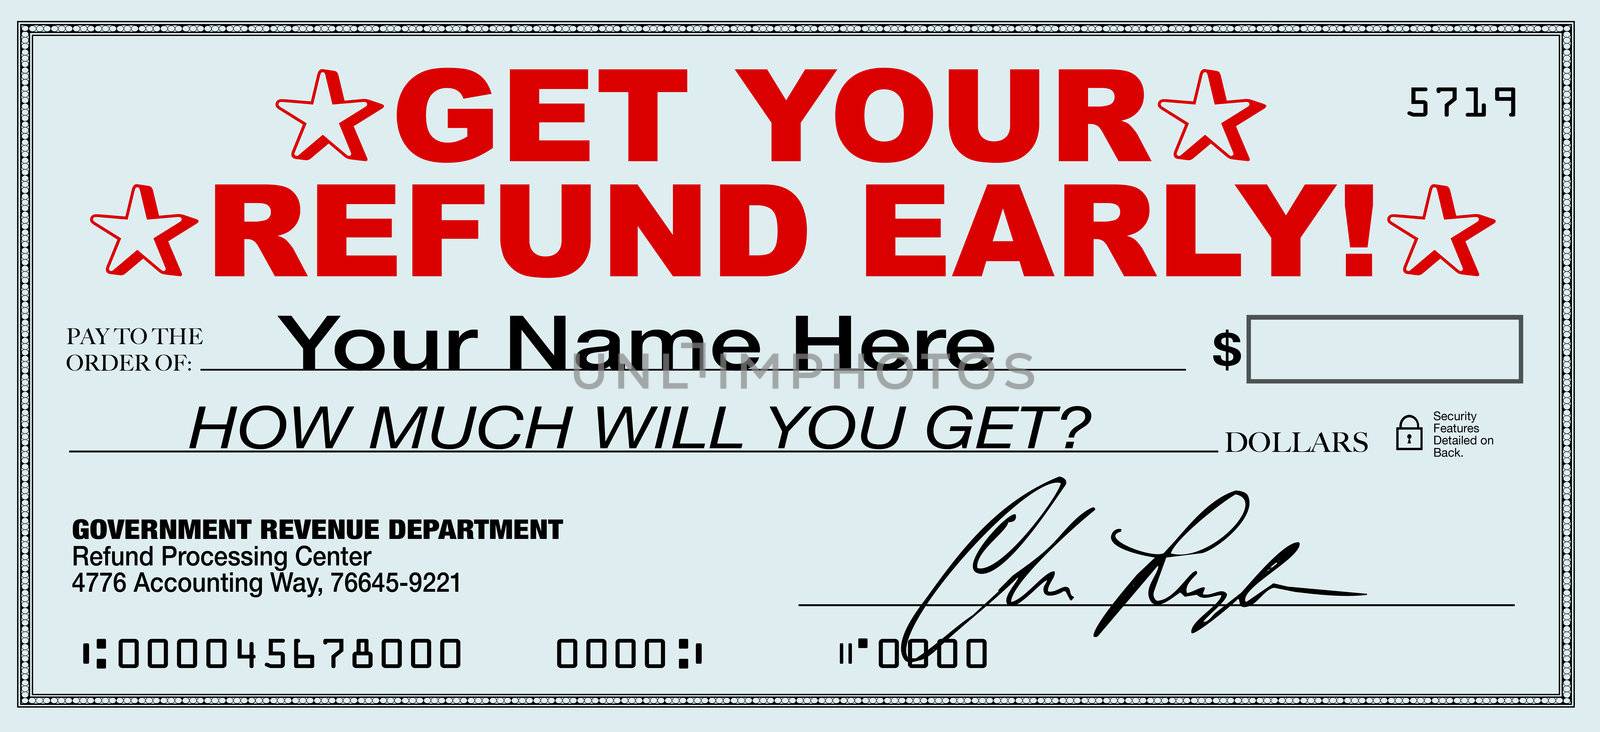 A tax refund check that you can receive early by using a tax return filing service that promises instant return of your overpaid taxes rather than waiting for the government response